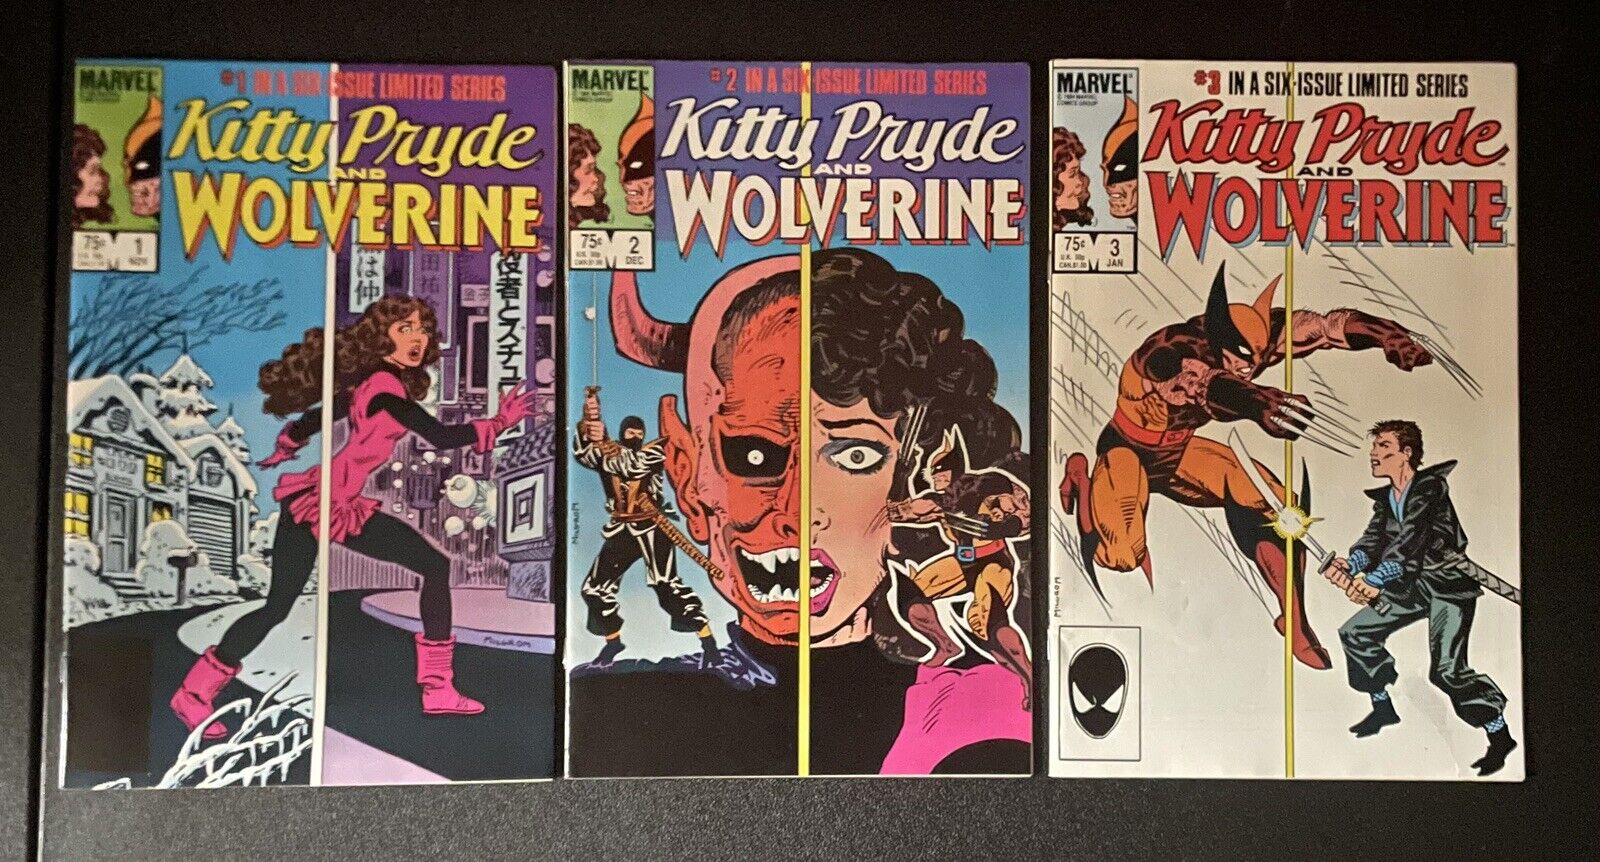 Kitty Pryde and Wolverine Issues 1, 2 and 3